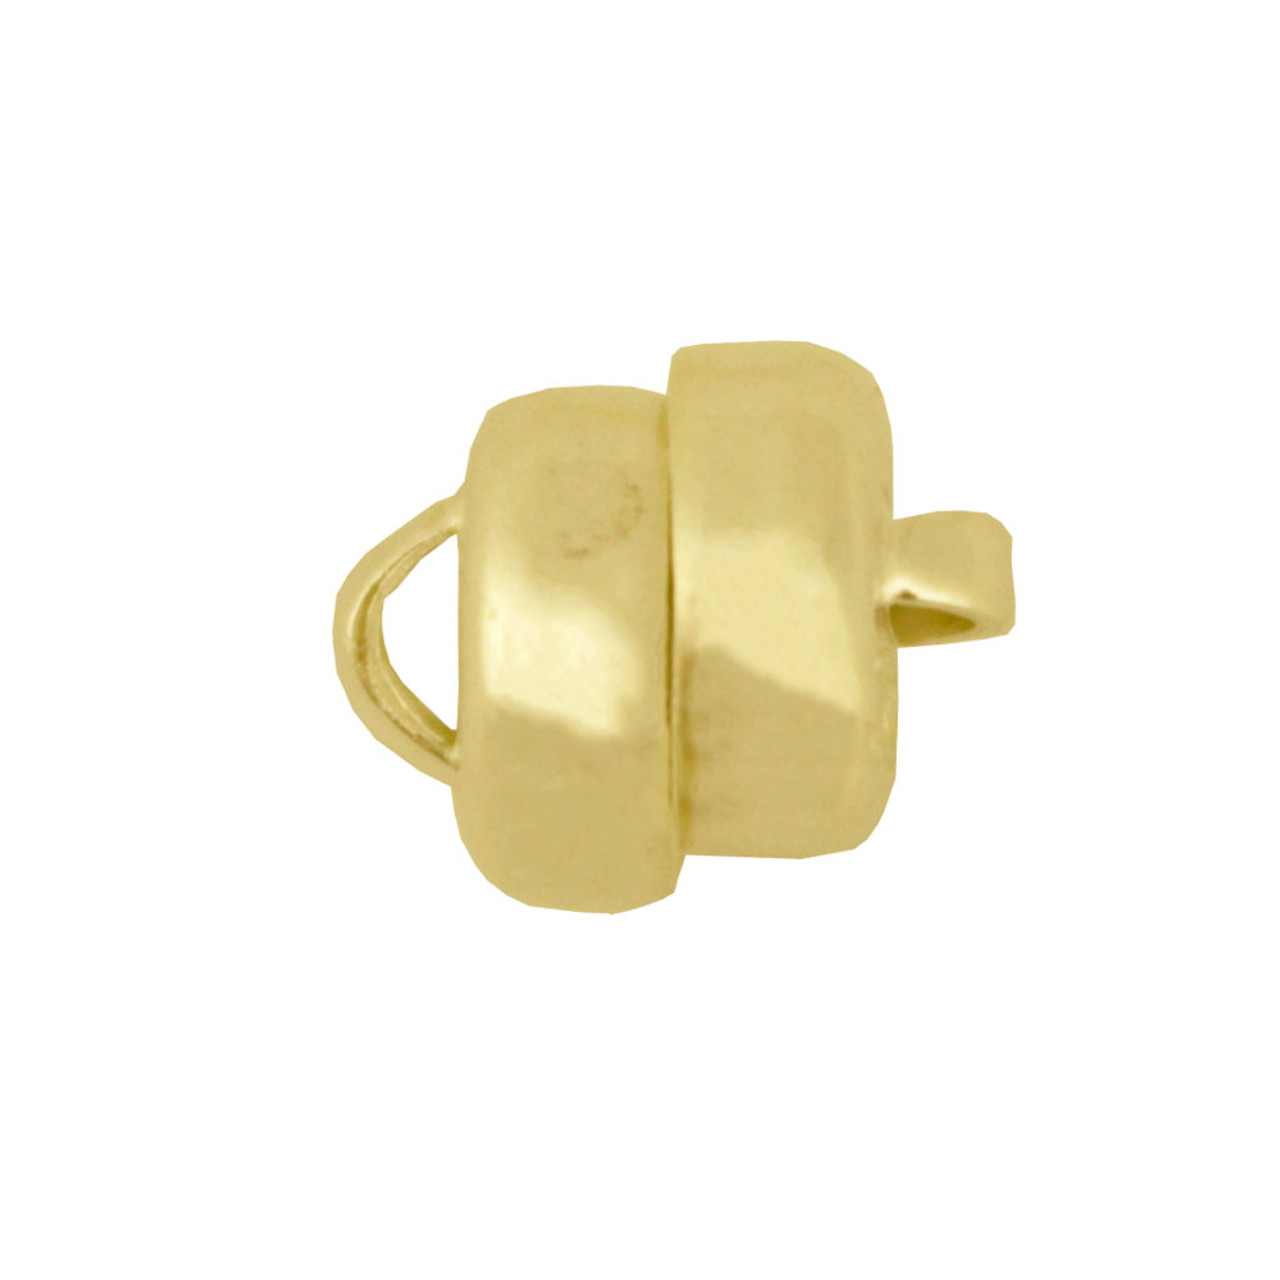 Magnetic Jewelry Clasps S/2 - Gold